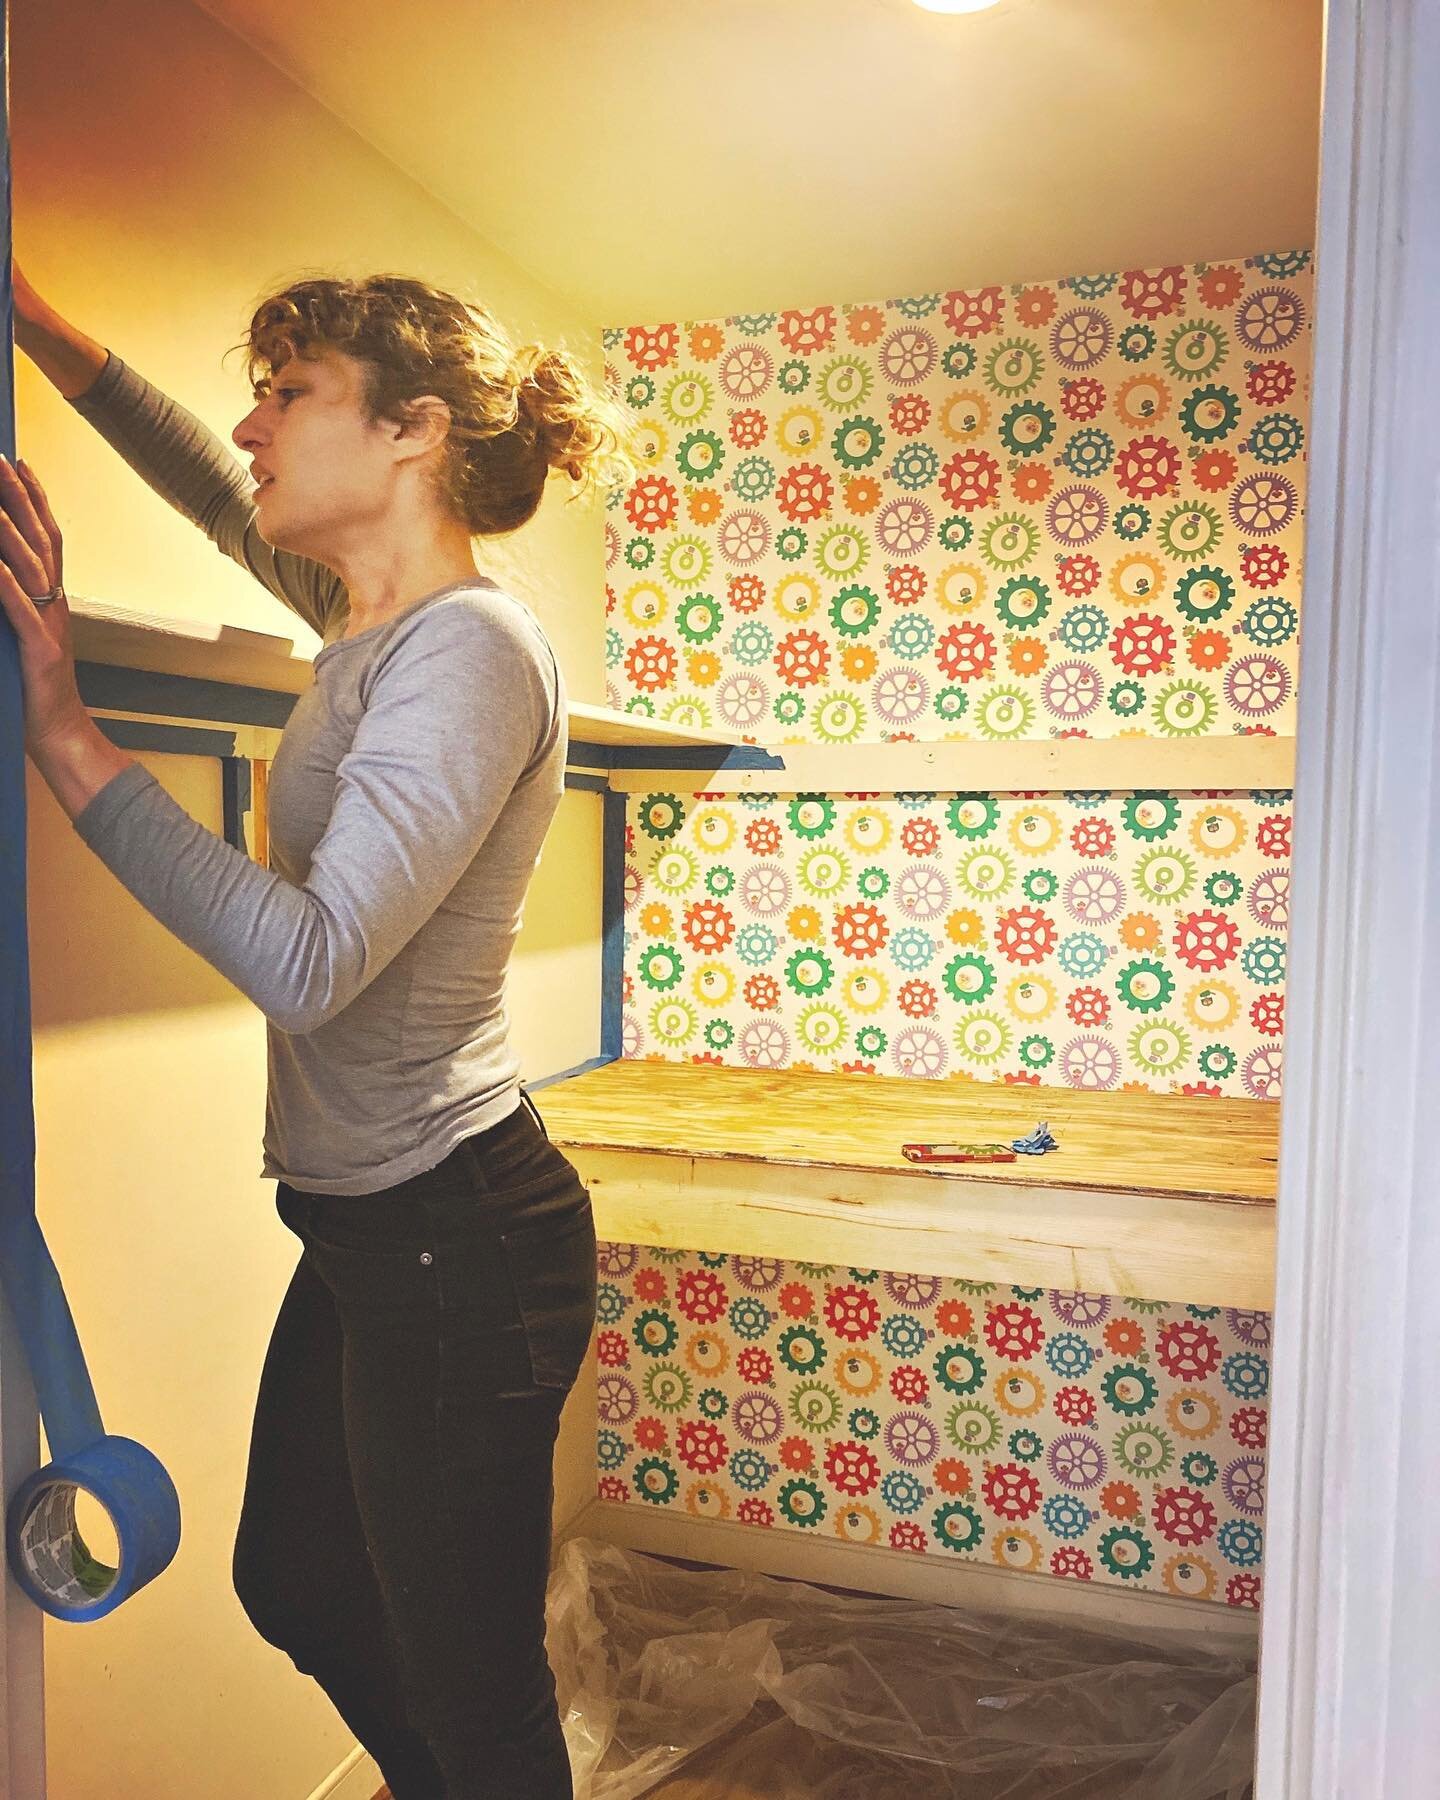 *TRANSFORMING A CLOSET INTO A TINKER ZONE - PART II*
.
After we installed the loft, @klnemett got to work doing her @finely_feathered magic.
.
First, she wallpapered. Then, she repainted the walls and trim, and cobbled together a custom foam pad out 